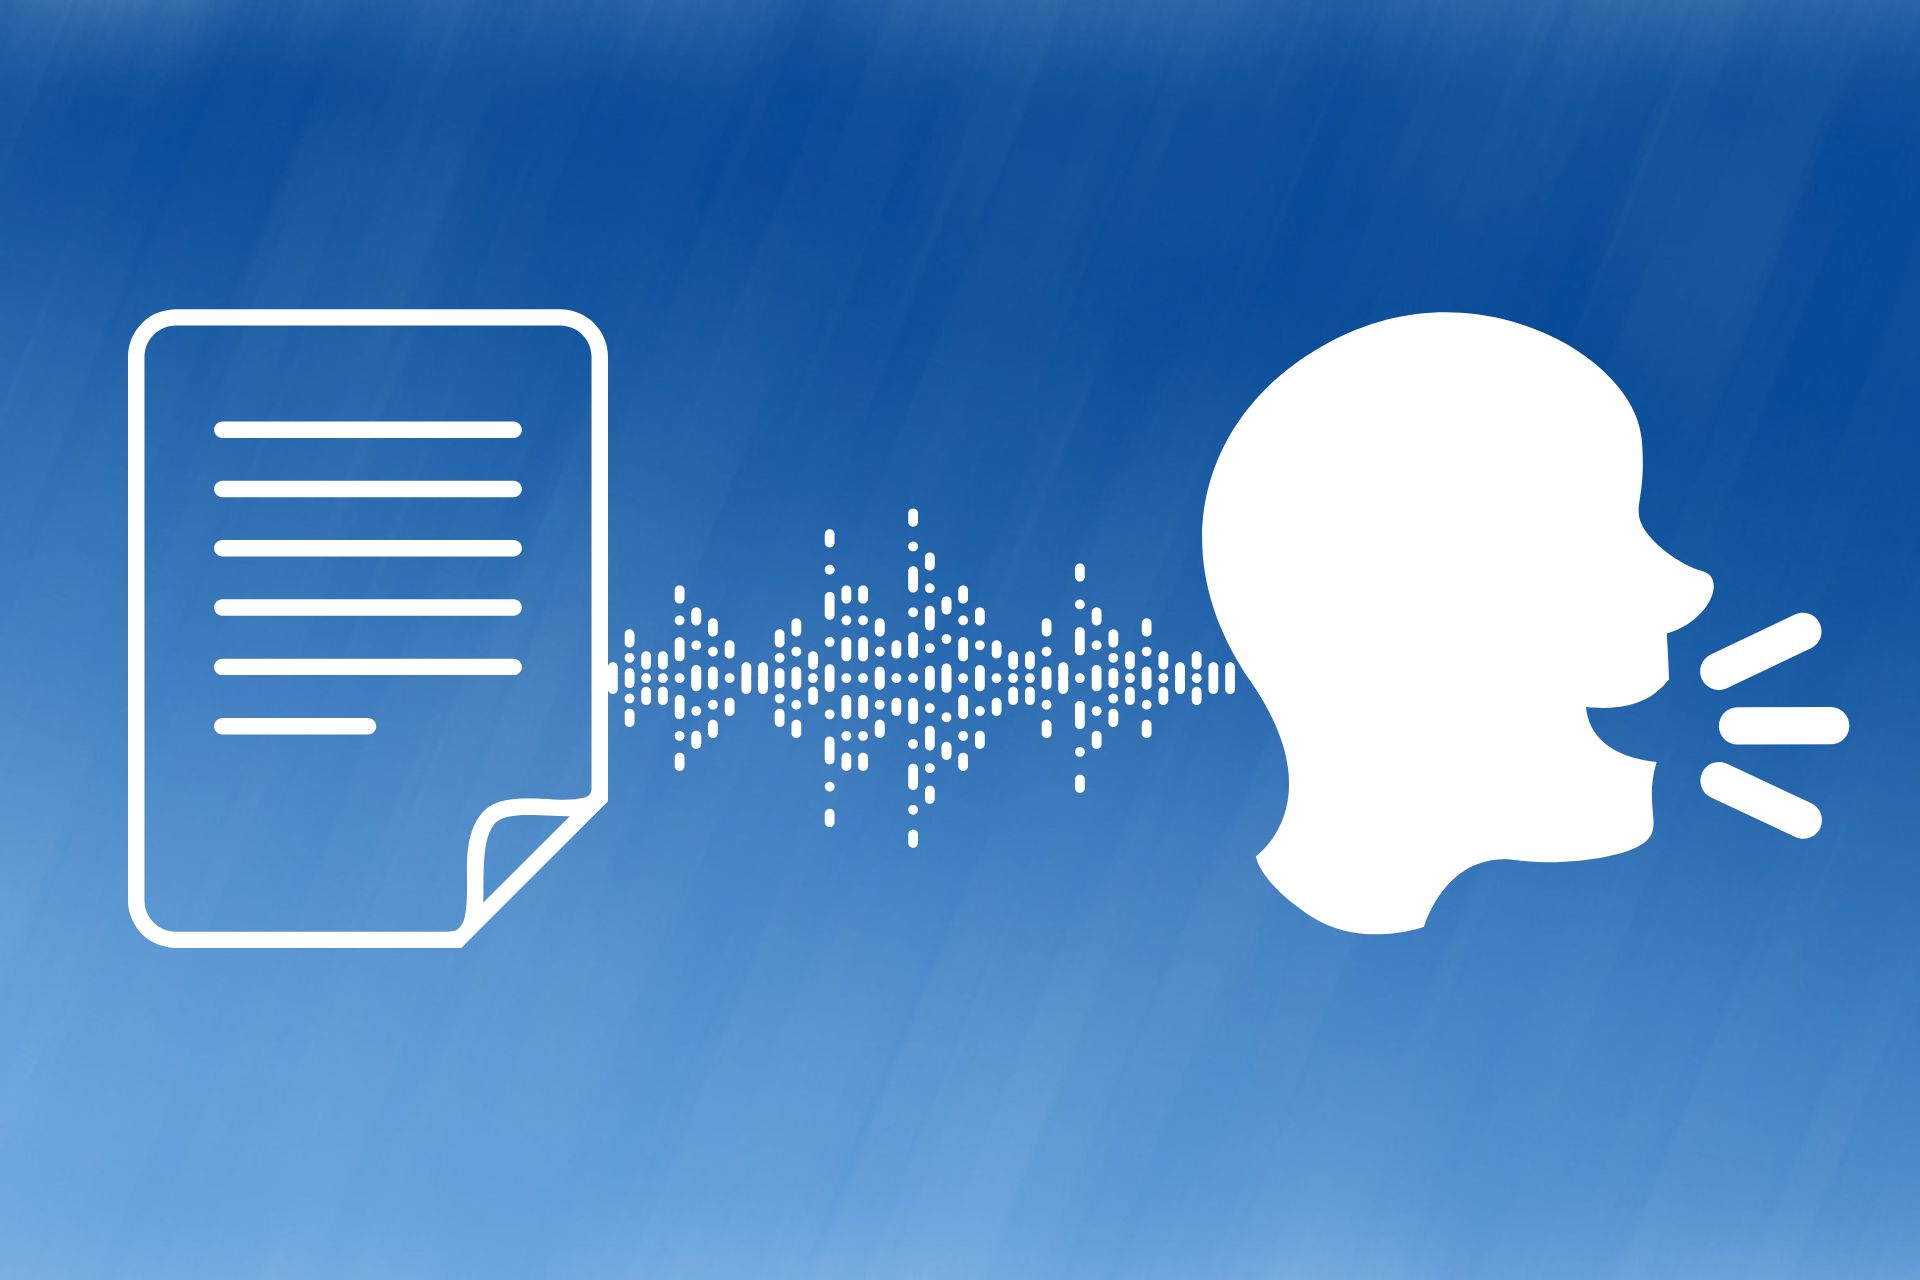 At Aflorithmic we are provider agnostic. Meaning that rather than being a Text-to-Speech voice provider, we own a voice library of over 500 AI voices, from the best TTS providers, all in one place. With access to these voices, you can then filter through them with a user-friendly navigation, making it quicker and easier than ever to integrate TTS voices into your business’ AI audio projects.